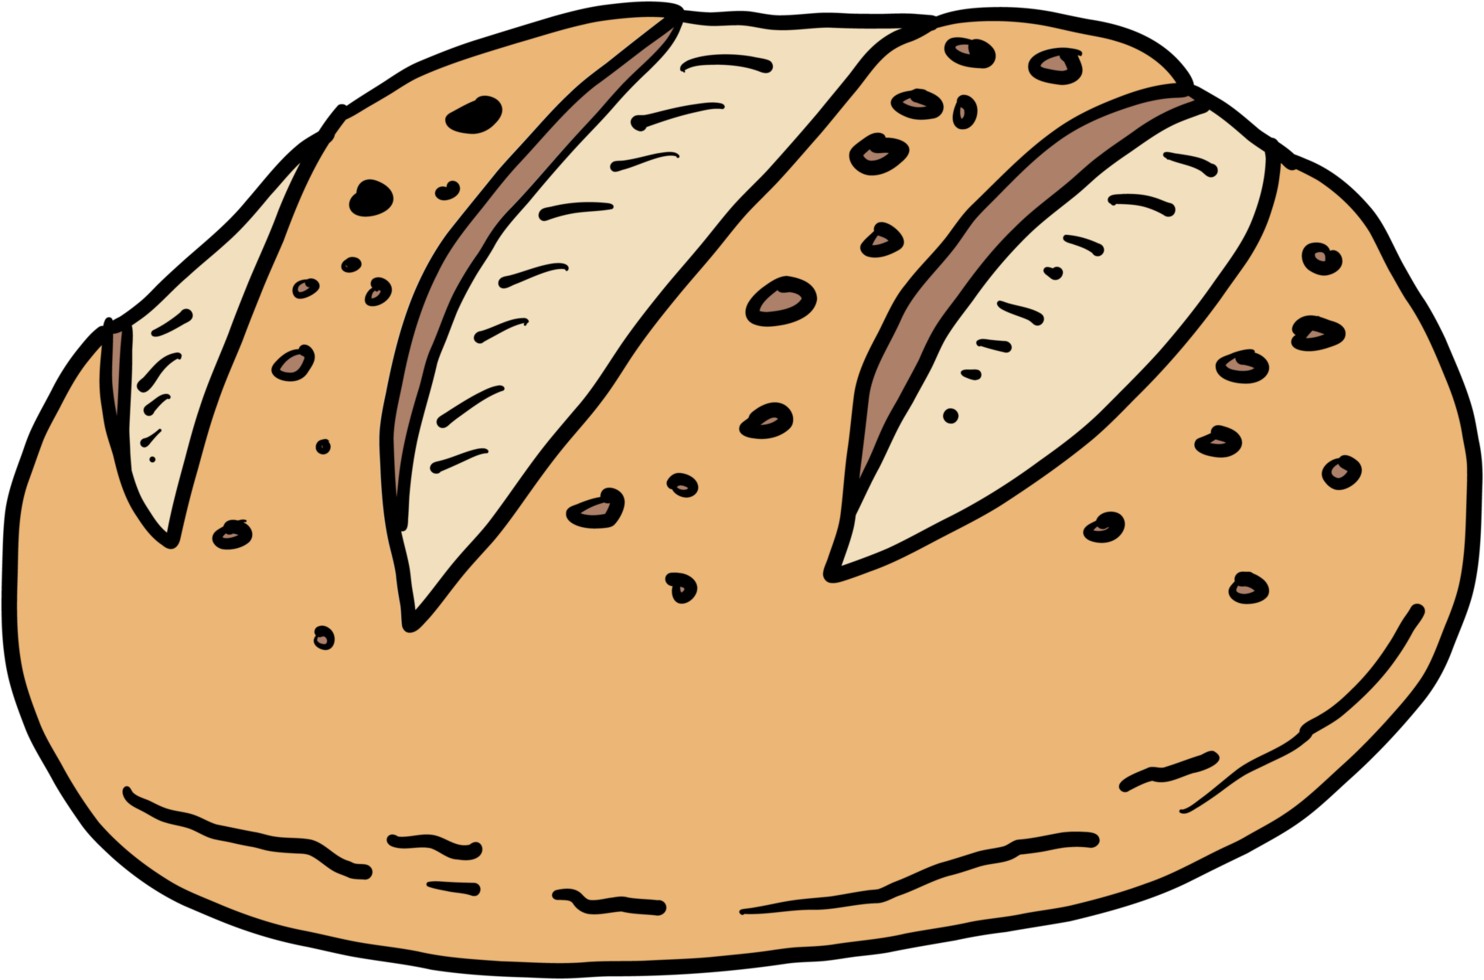 doodle freehand sketch drawing of bread. png